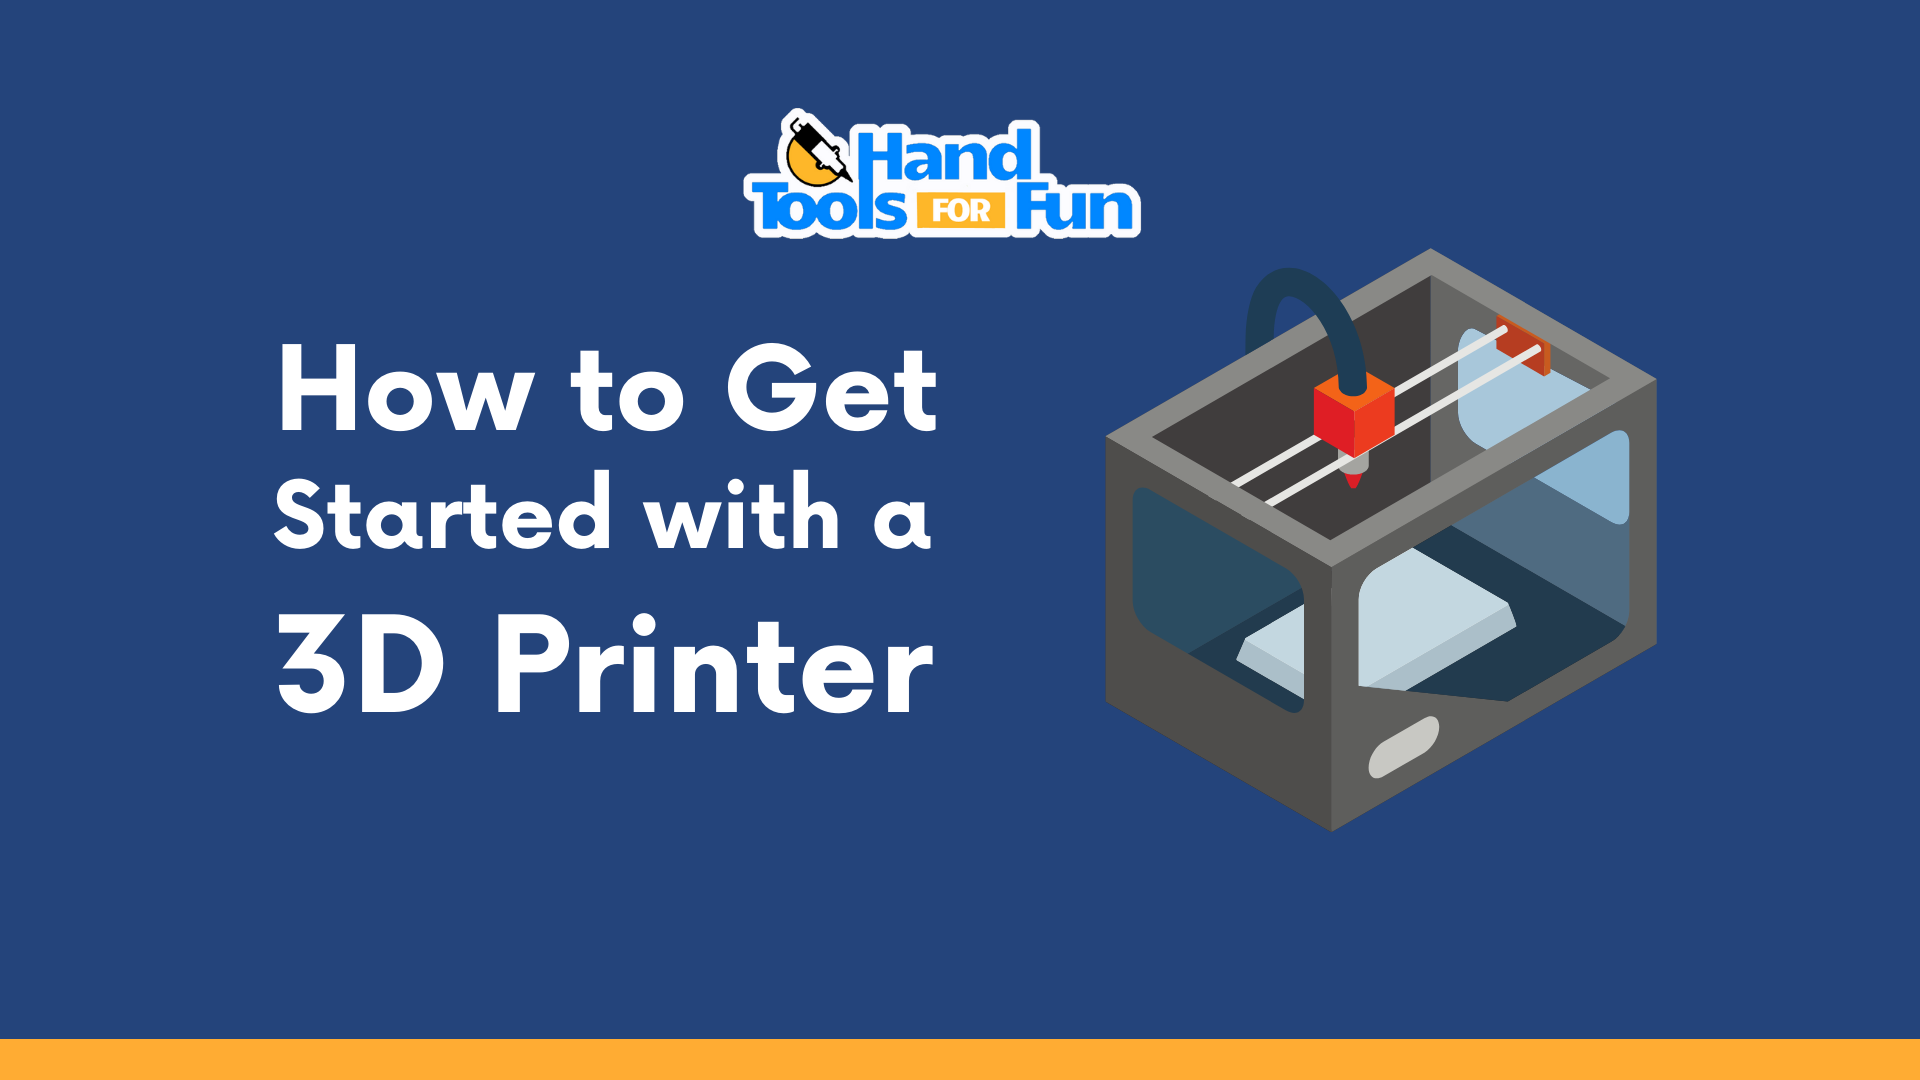 'Video thumbnail for How to Get Started with a 3D Printer'